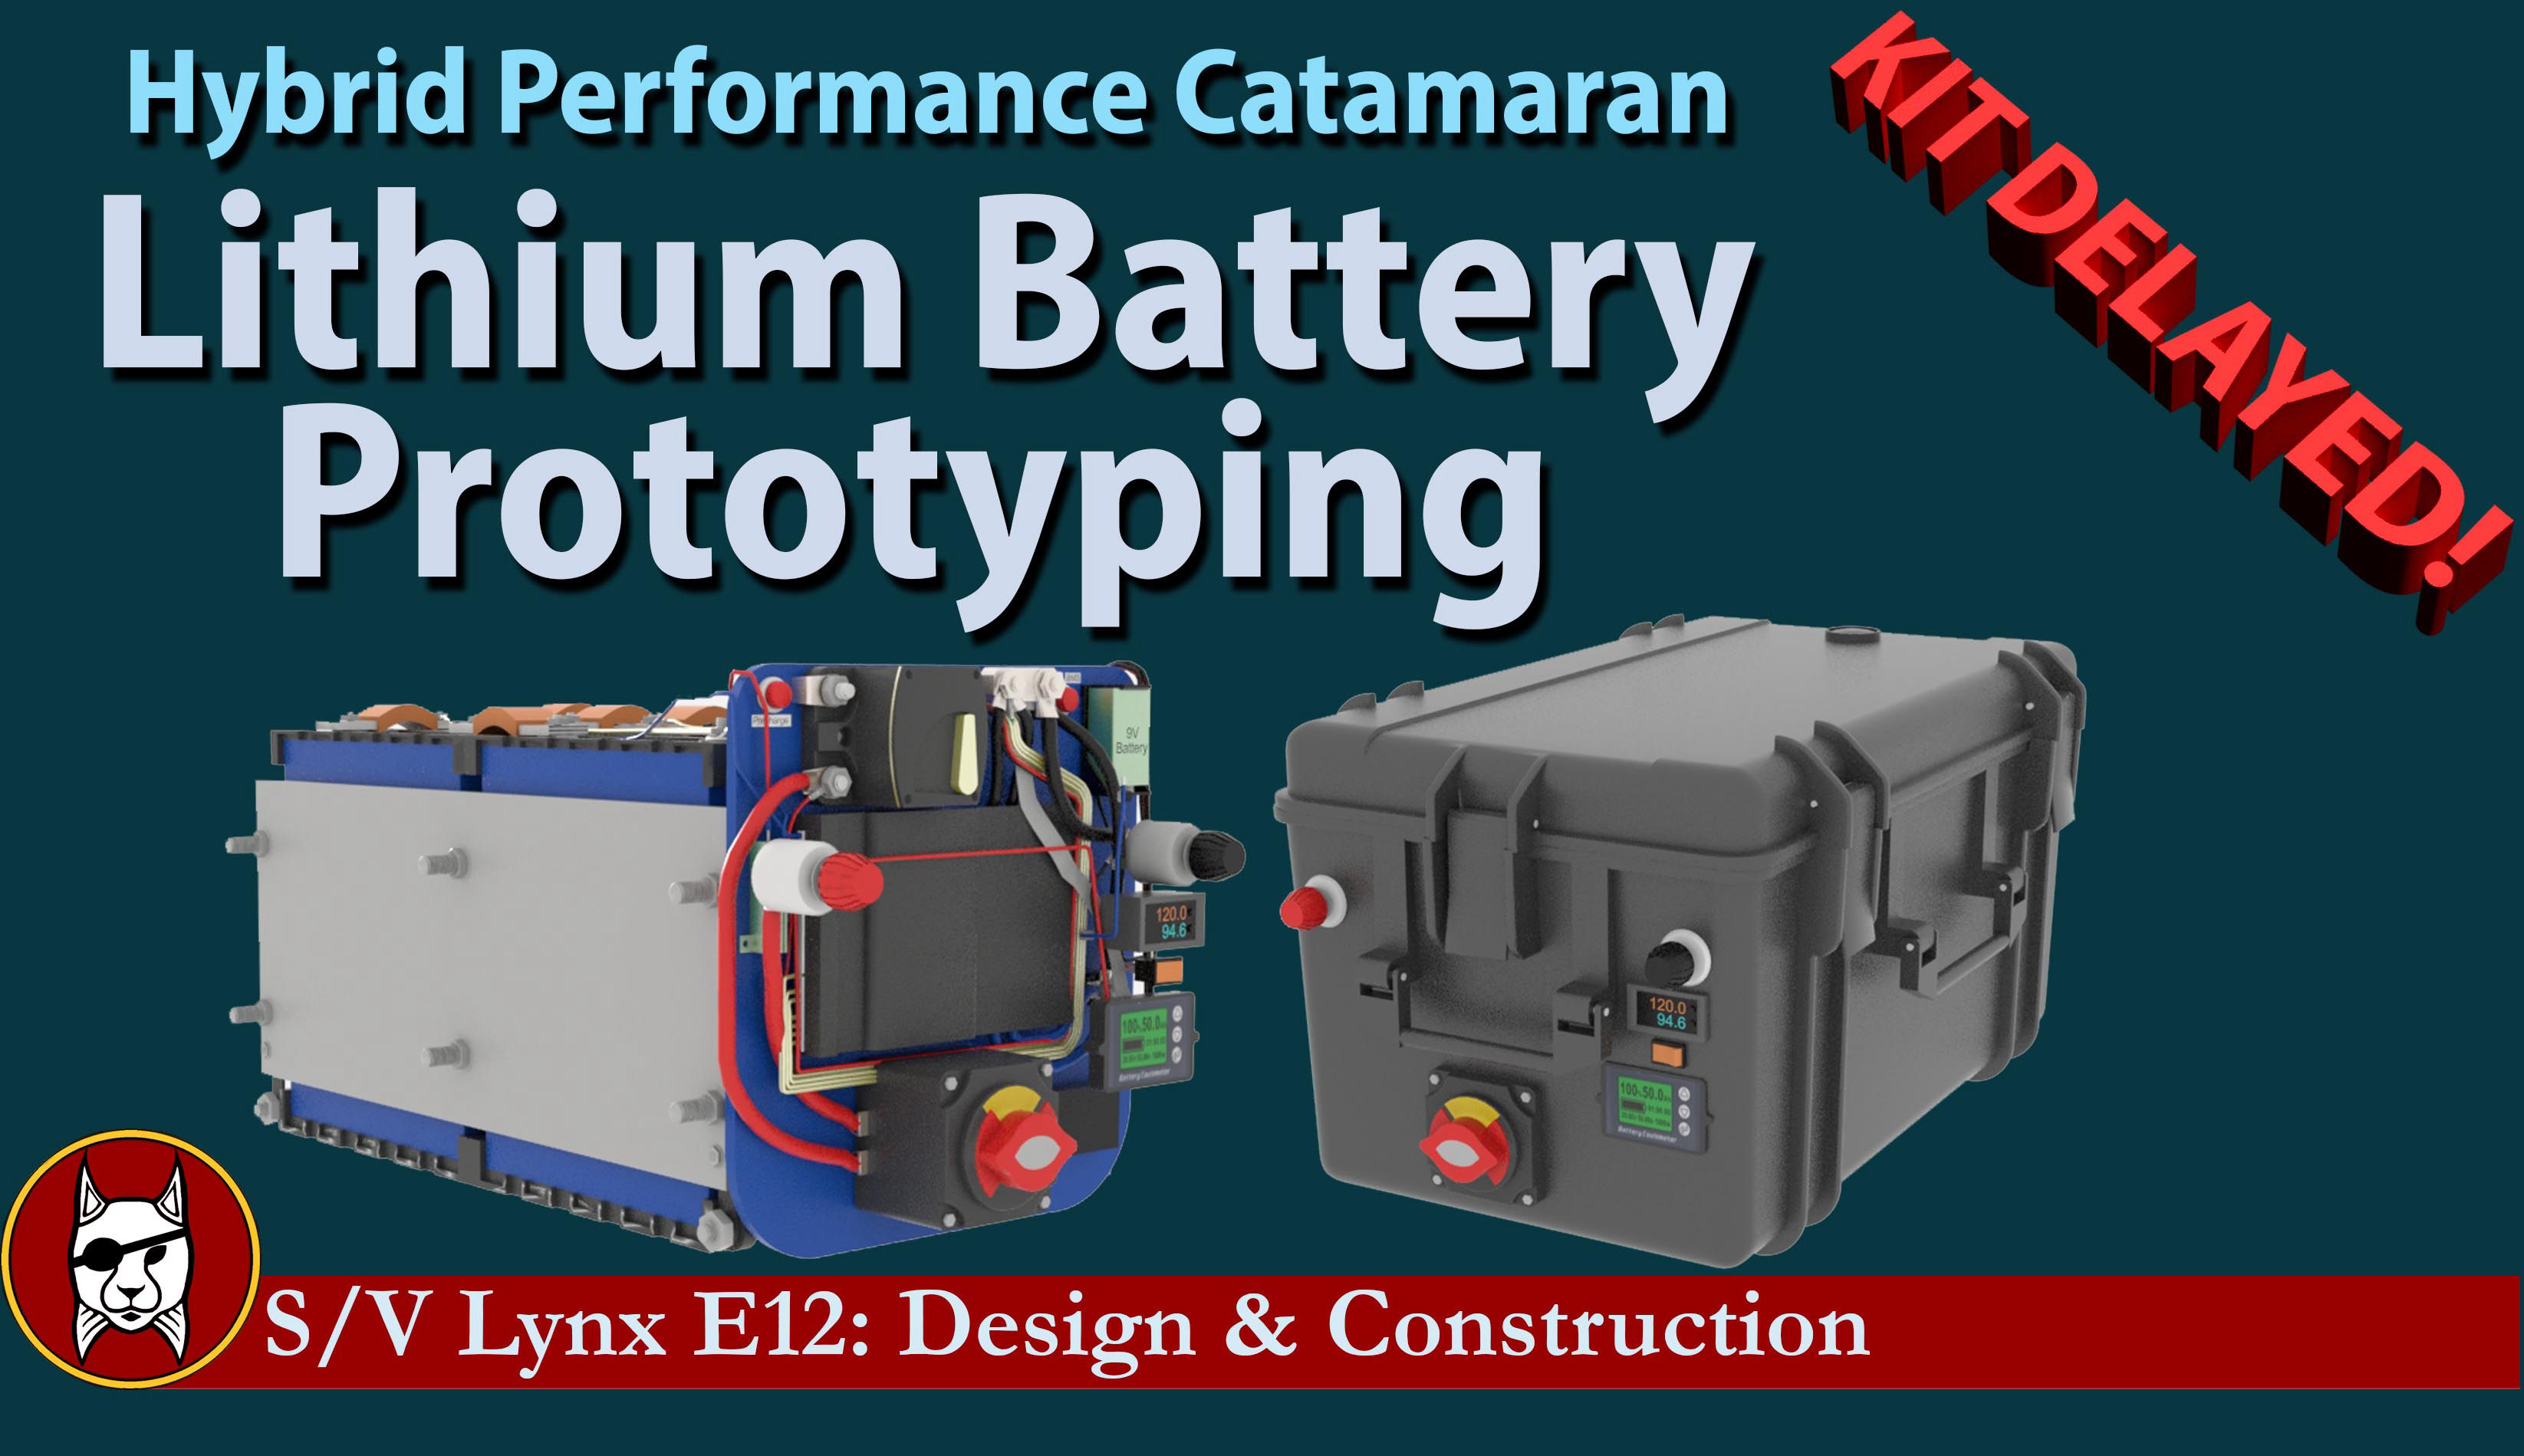 Lithium Battery Prototyping